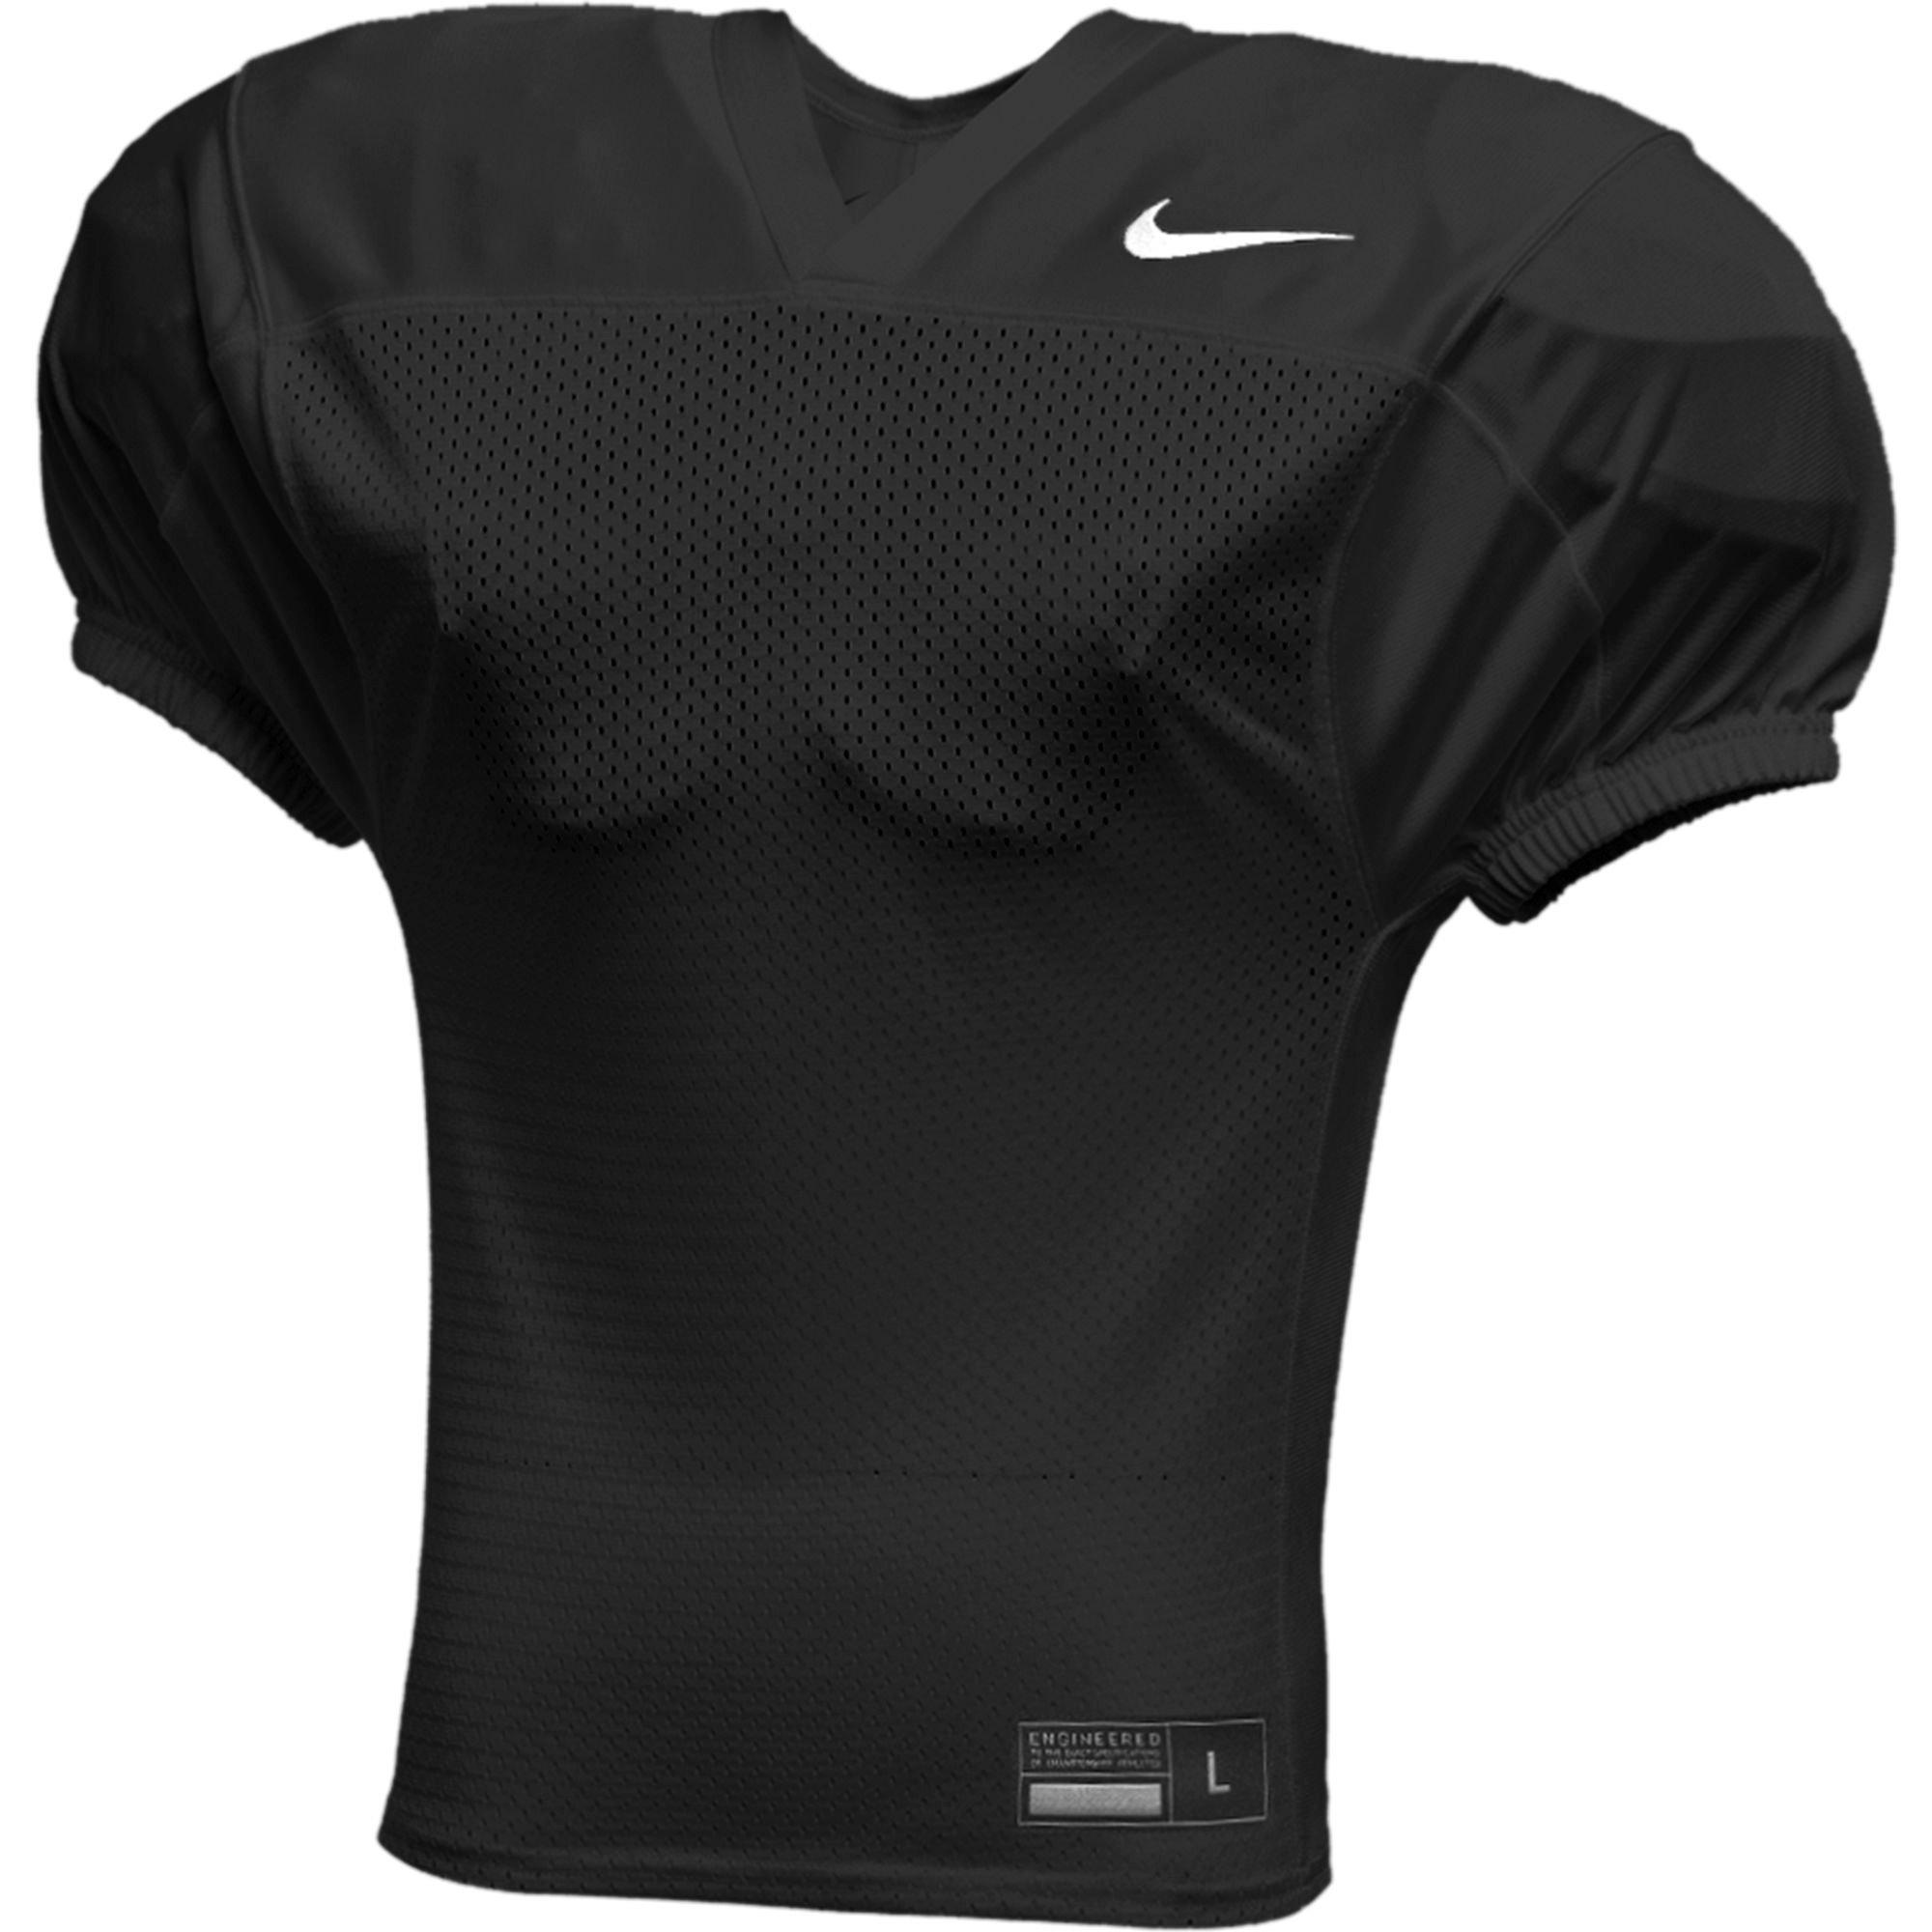 Intensity Youth Football Practice Jersey 